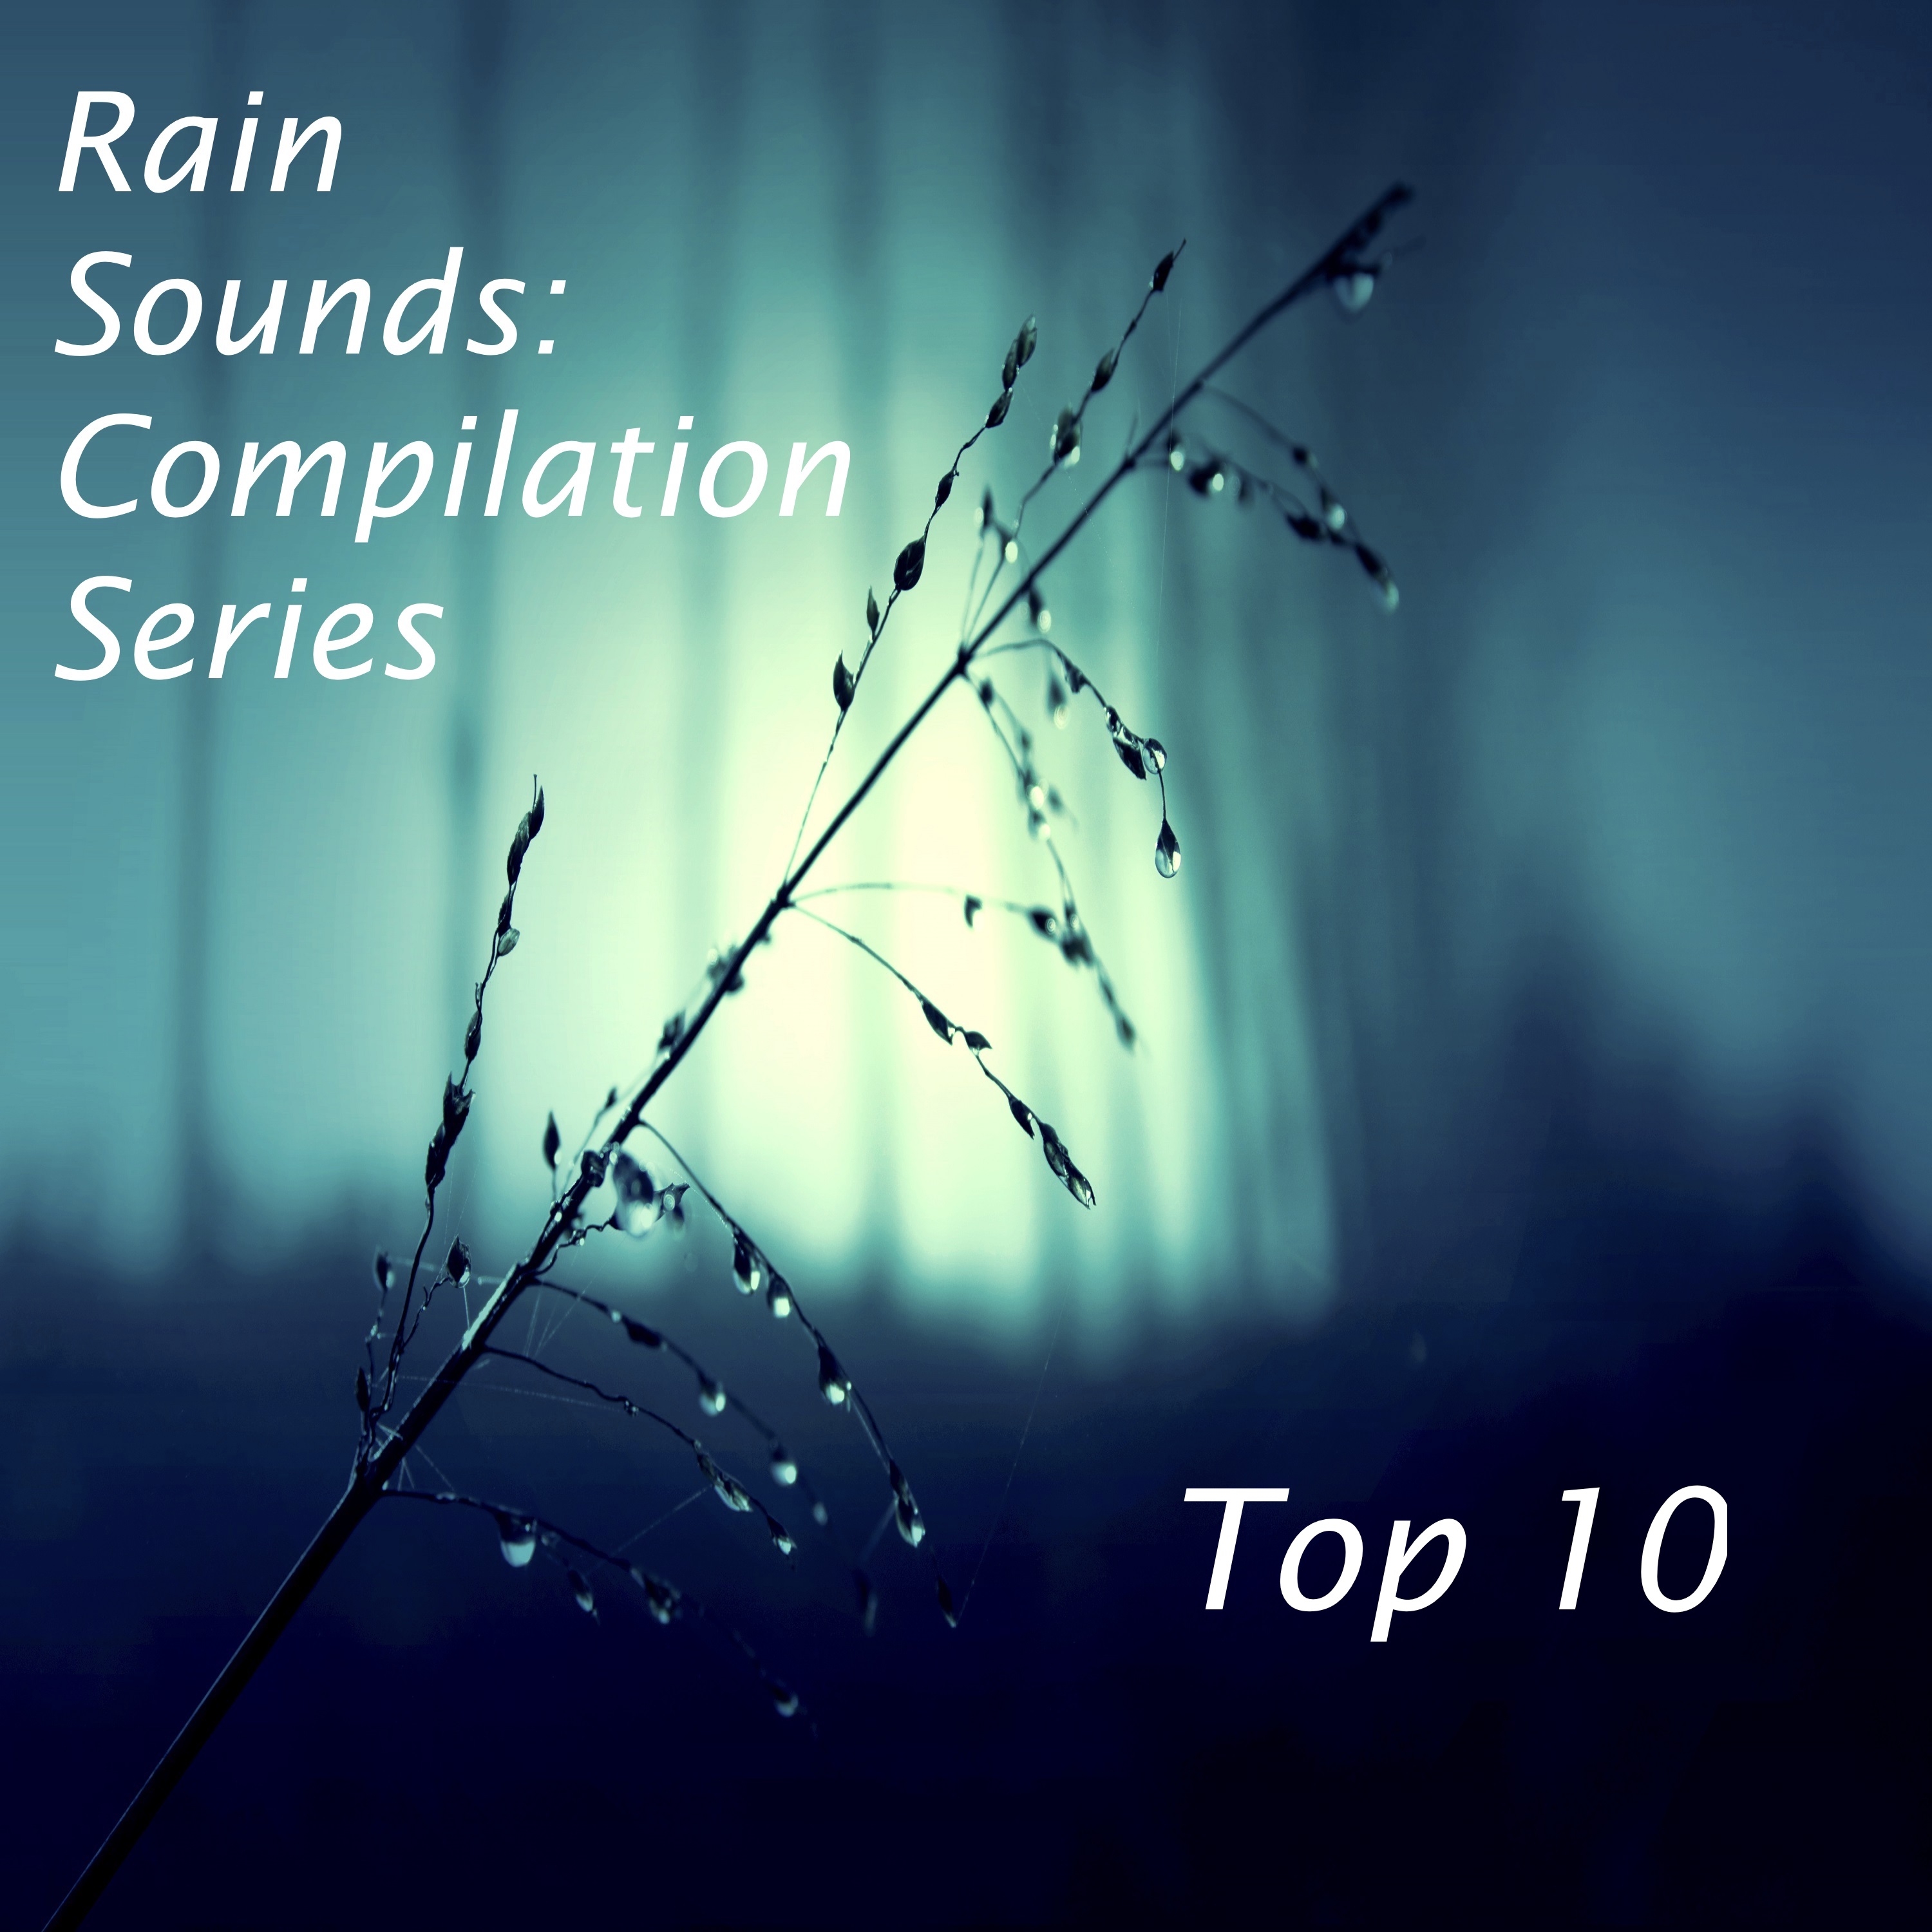 2017 Compilation: Top 10 Loopable Rain Sounds for Deep Sleep, Insomnia, Meditation and Relaxation